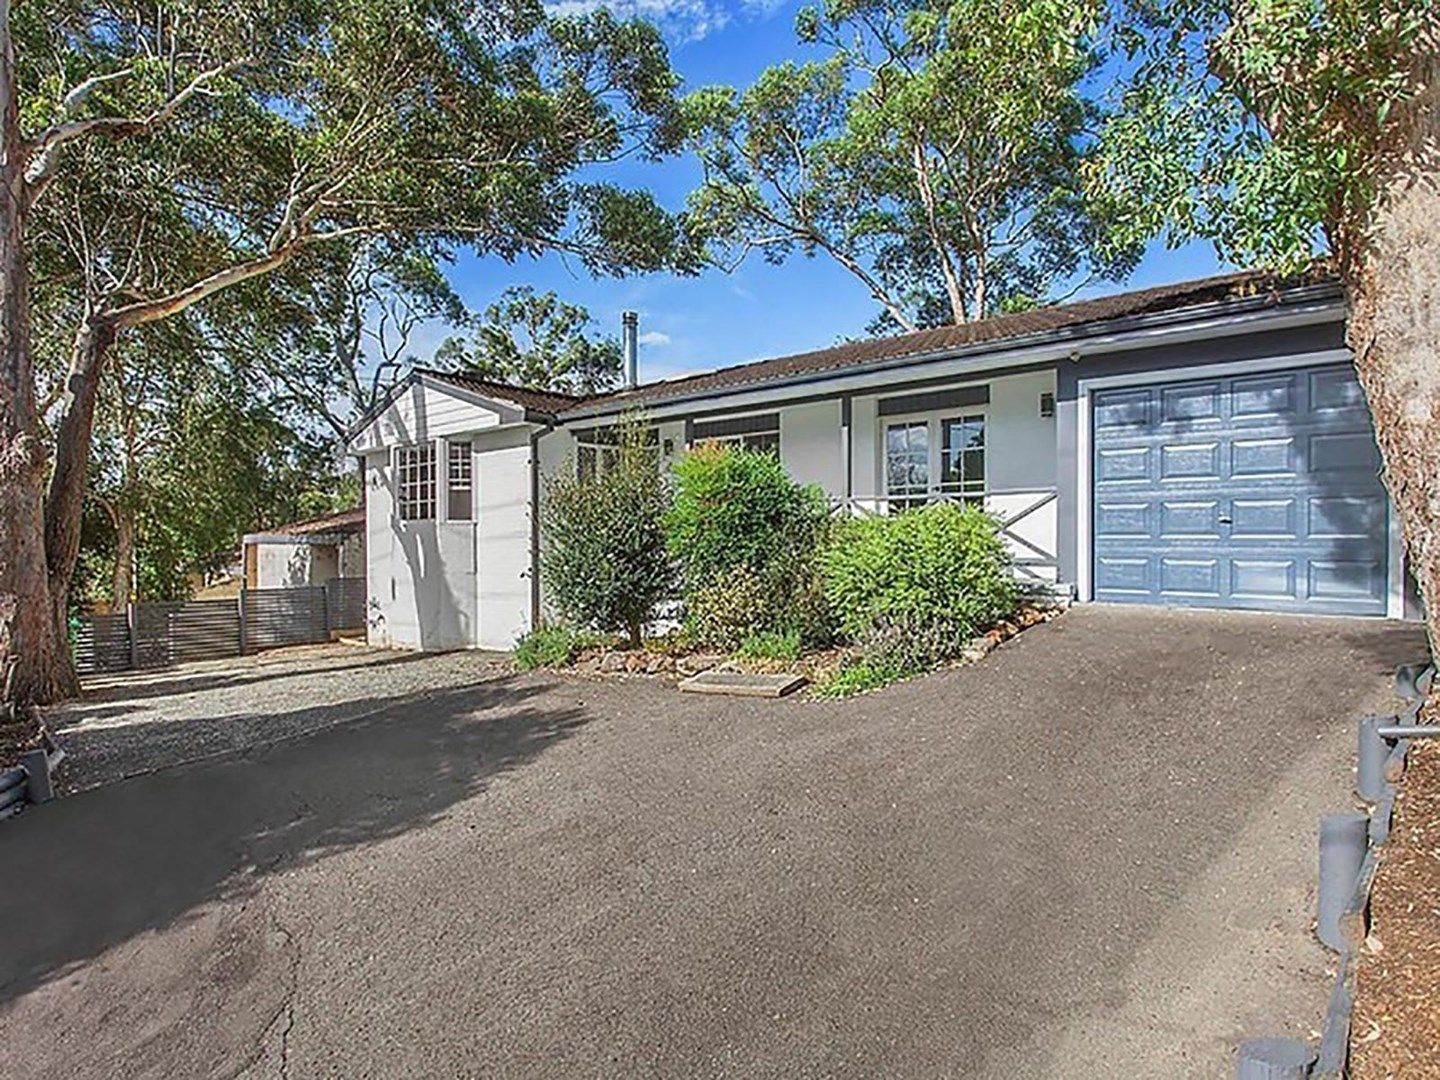 284 Avoca Drive, Green Point NSW 2251, Image 1